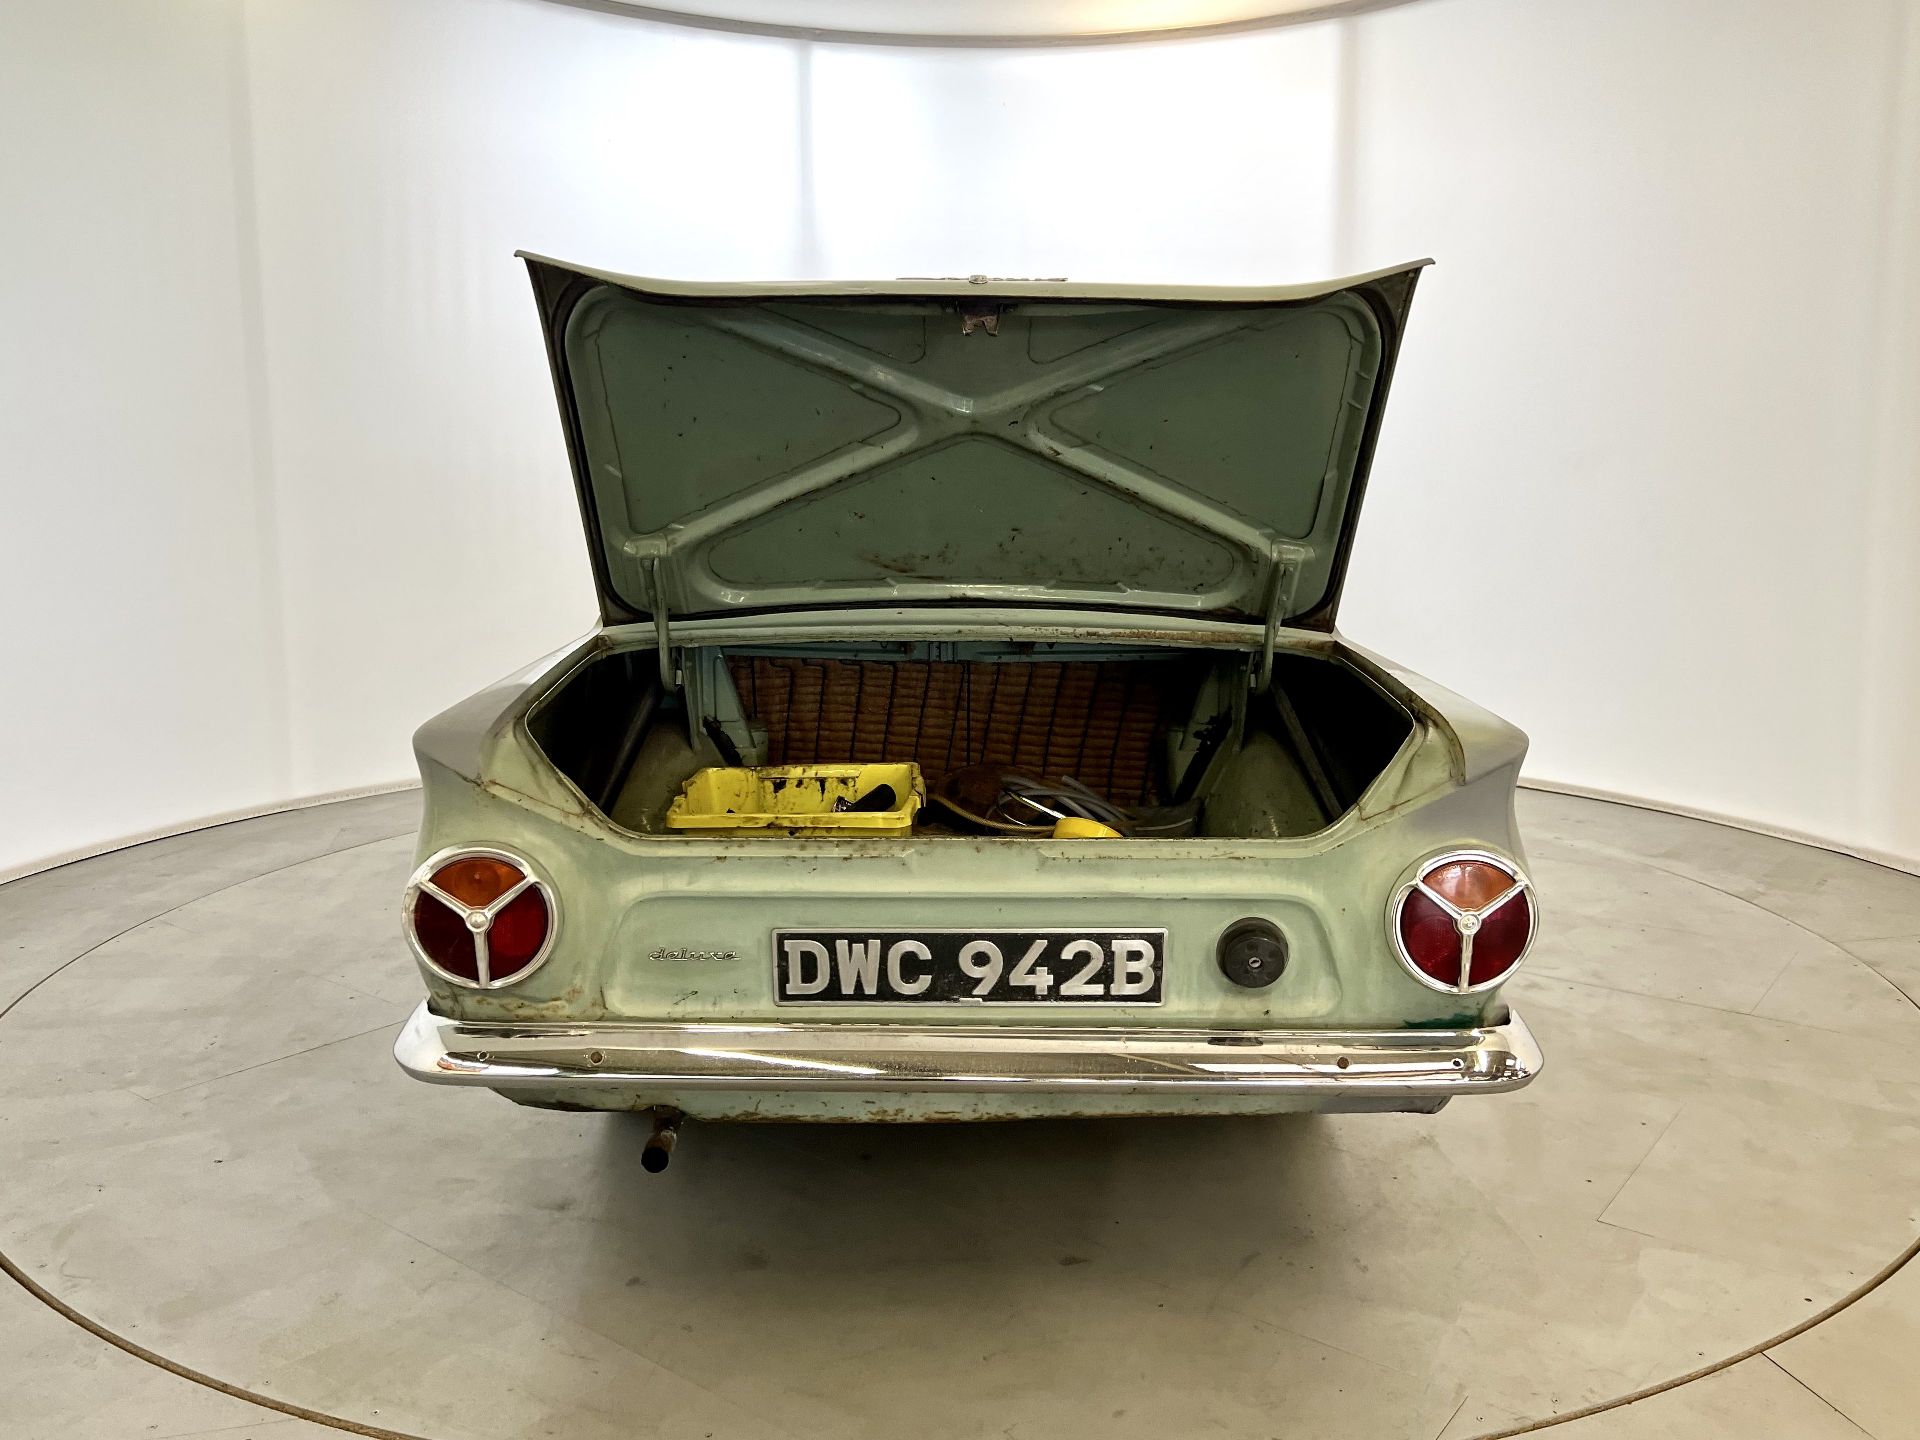 Ford Cortina Deluxe - Image 29 of 31